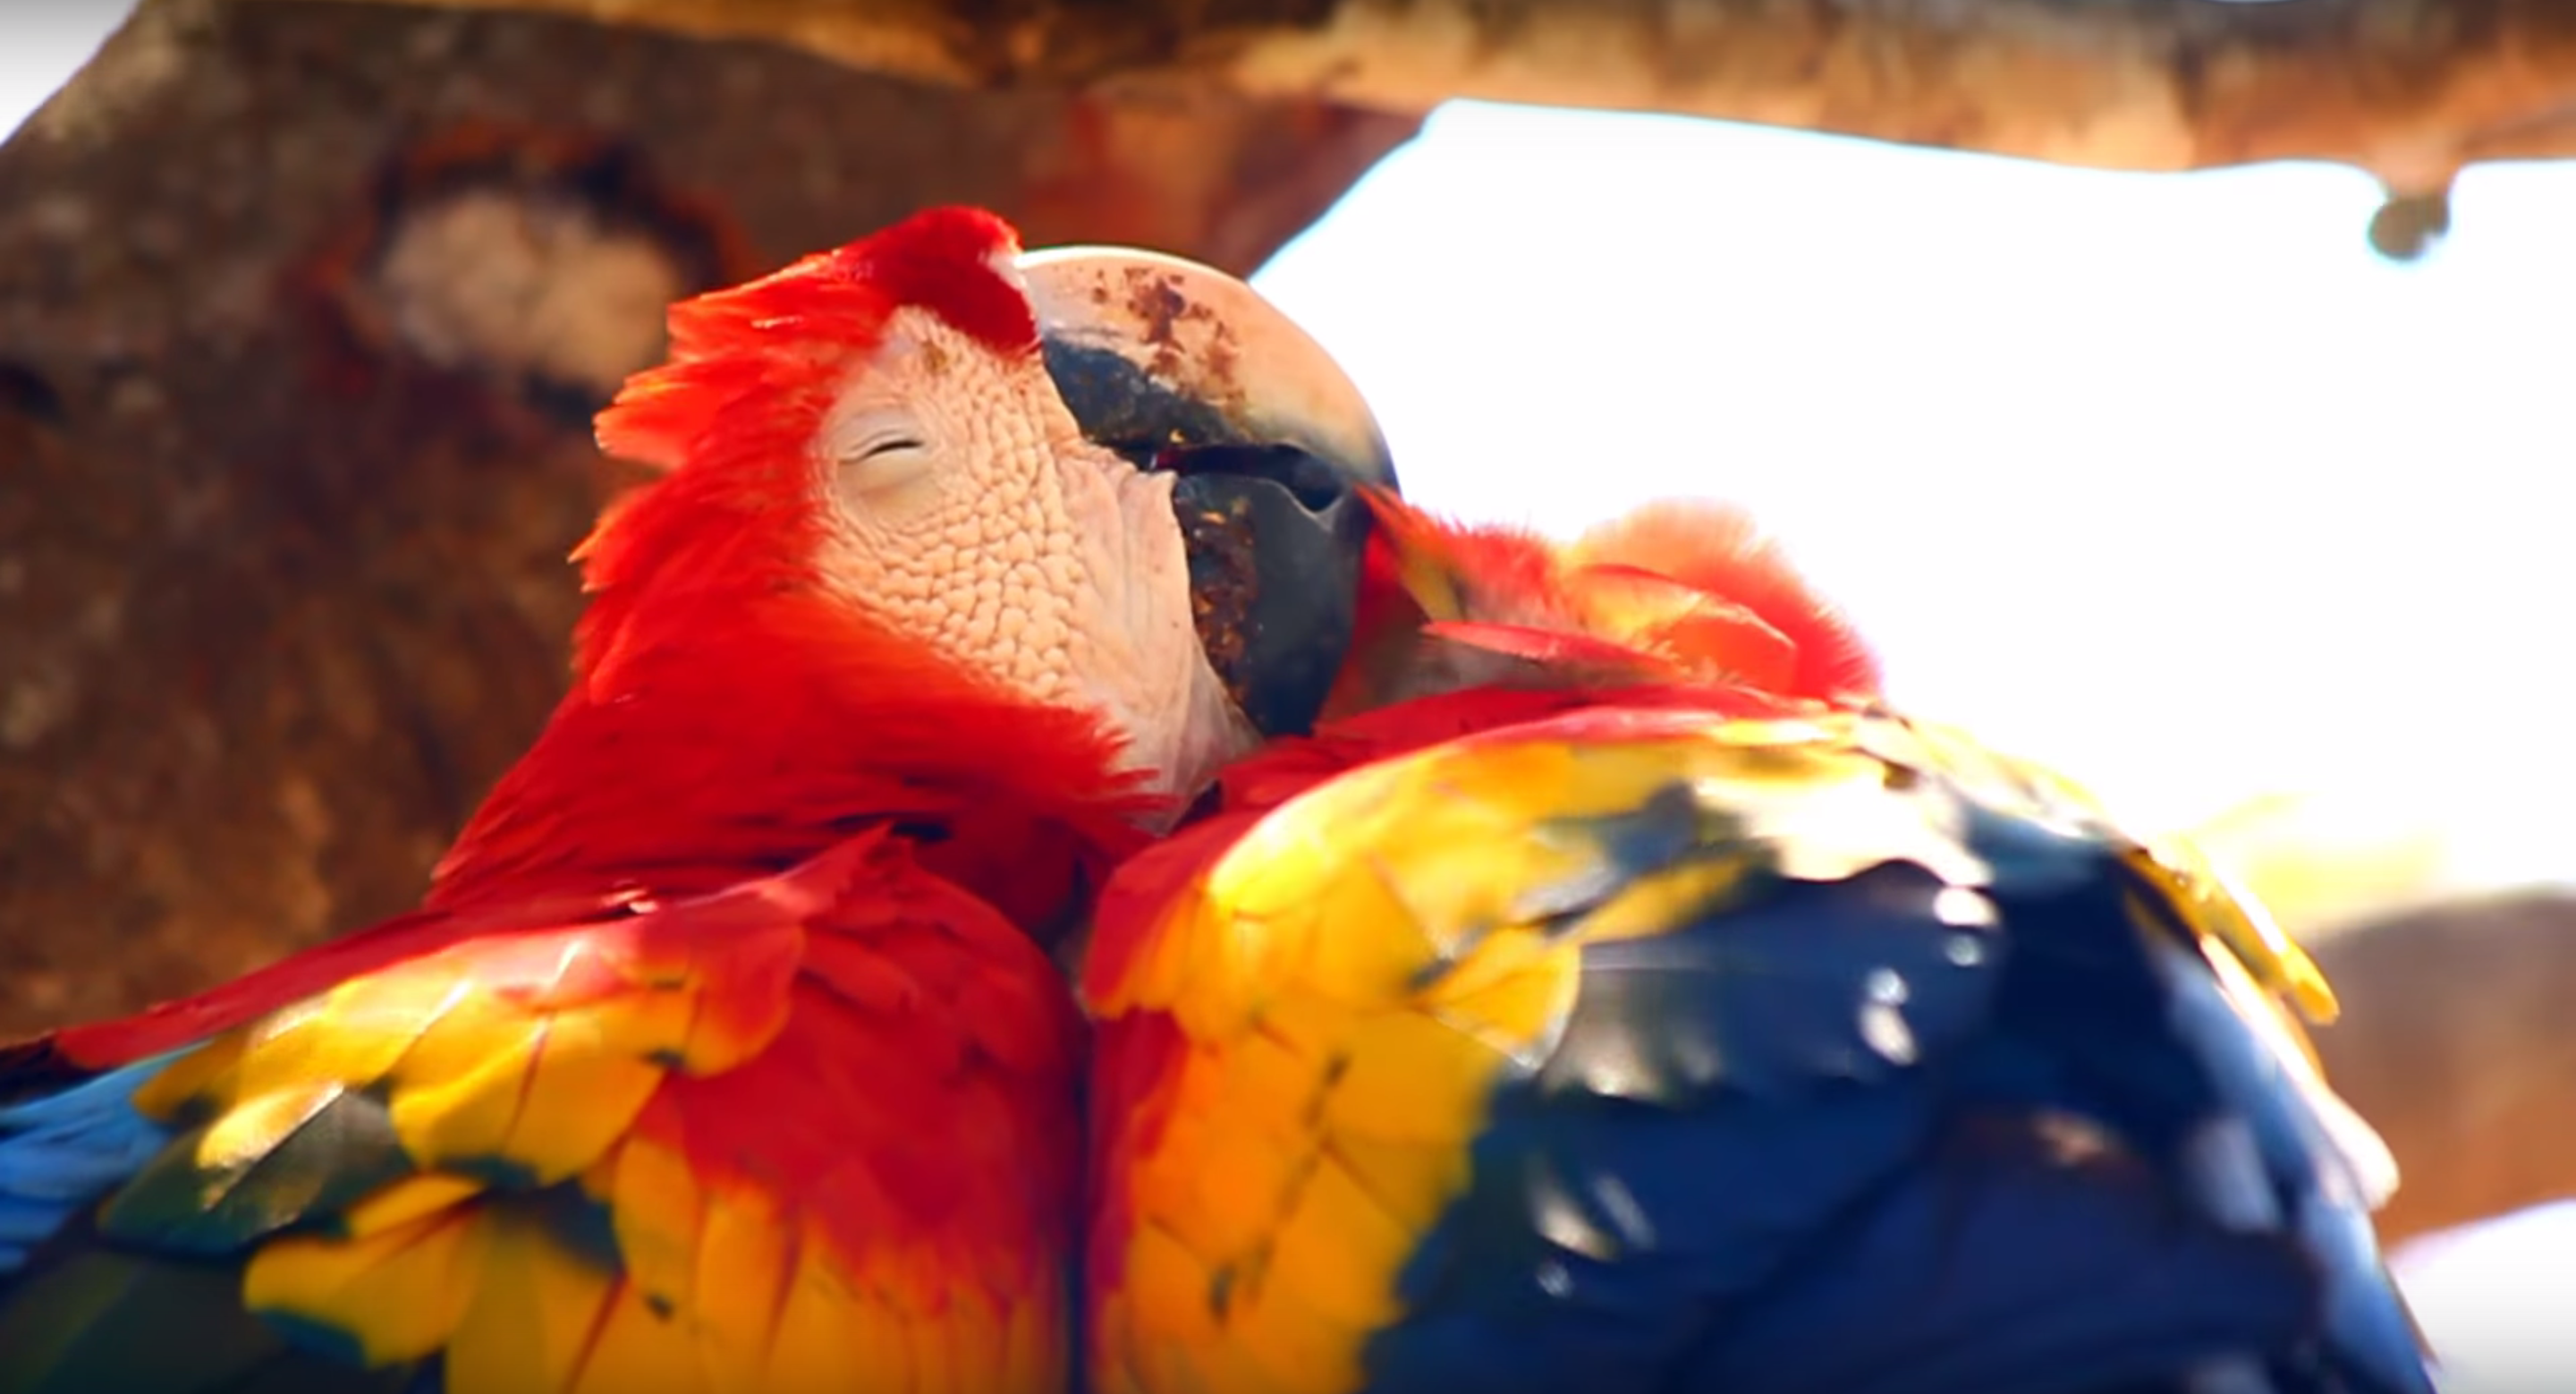 Breathtaking Video: Bet These Scarlet Macaws Can Bring a Tear To Your Eye